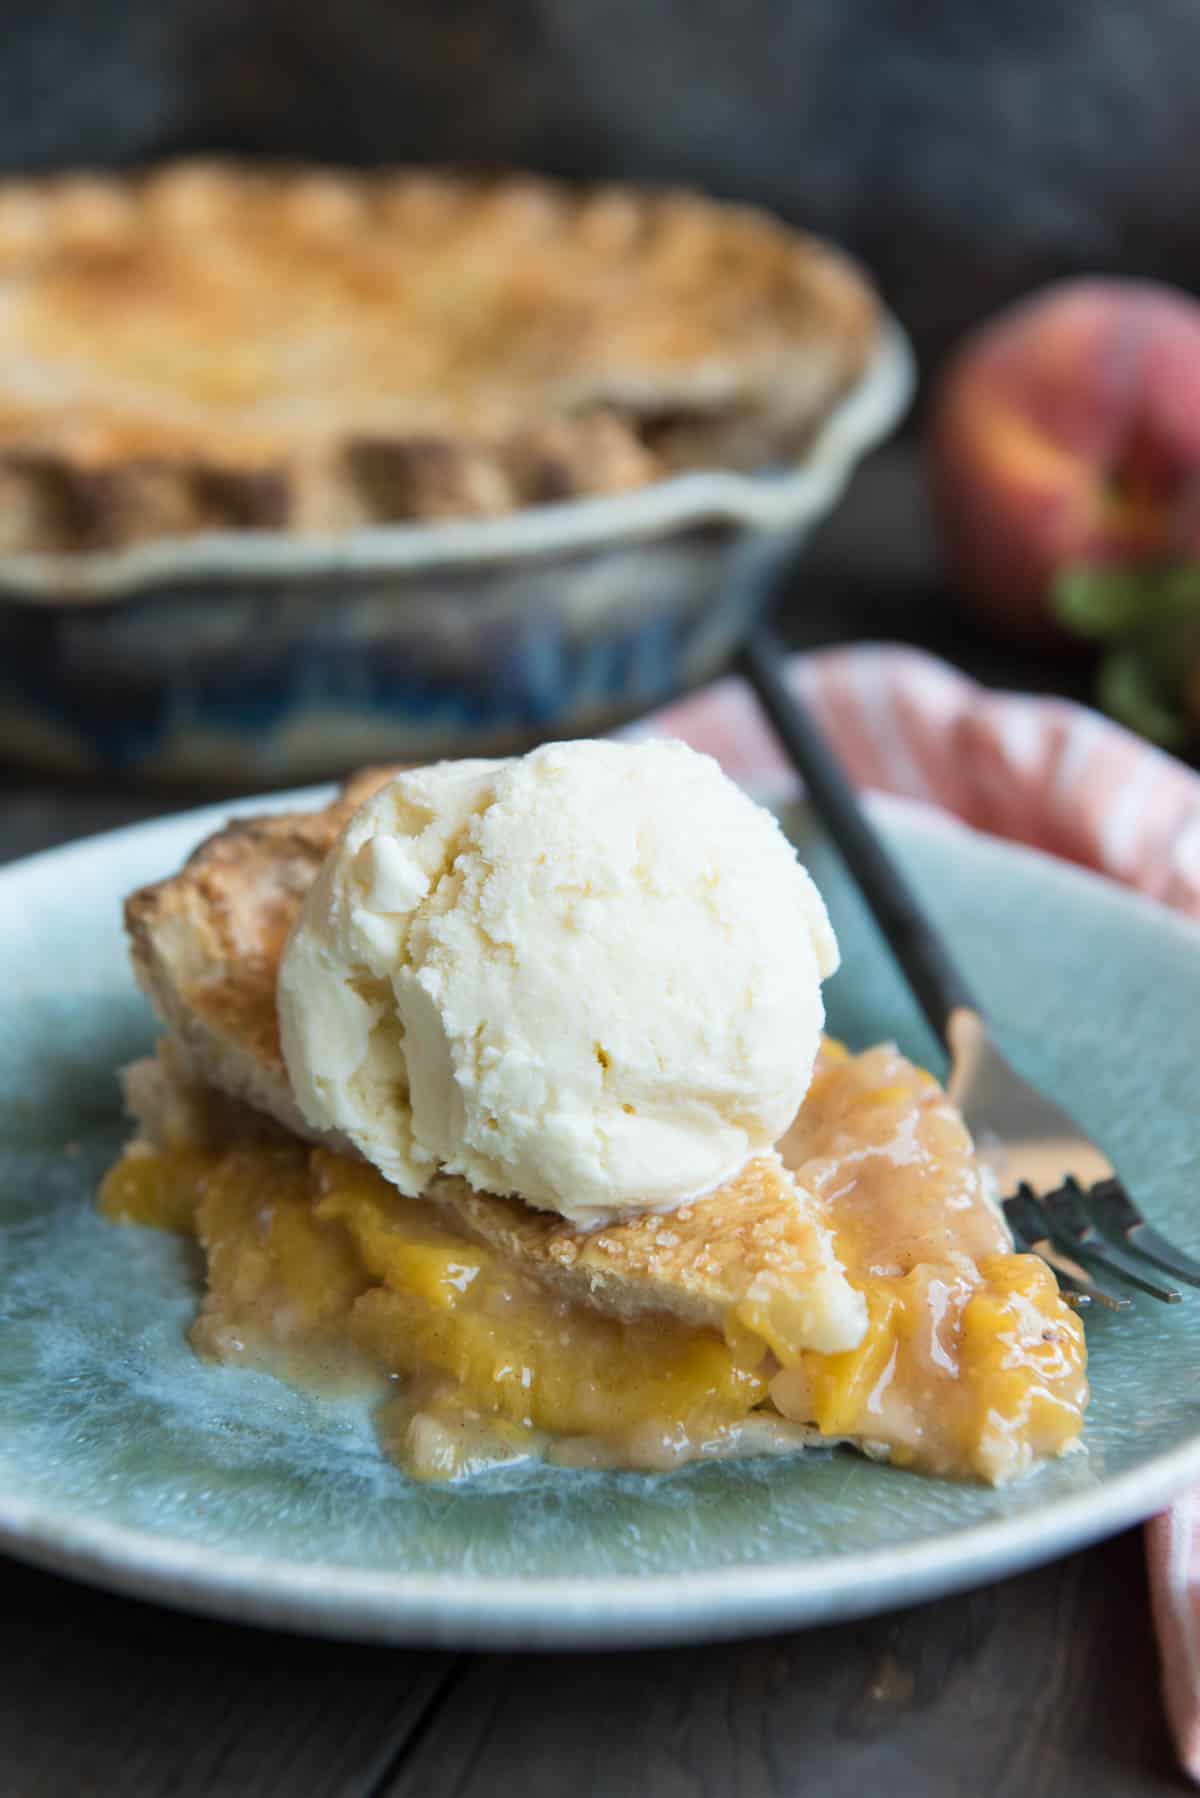 A slice of peach pie on a plate with a scoop of white ice cream on top.